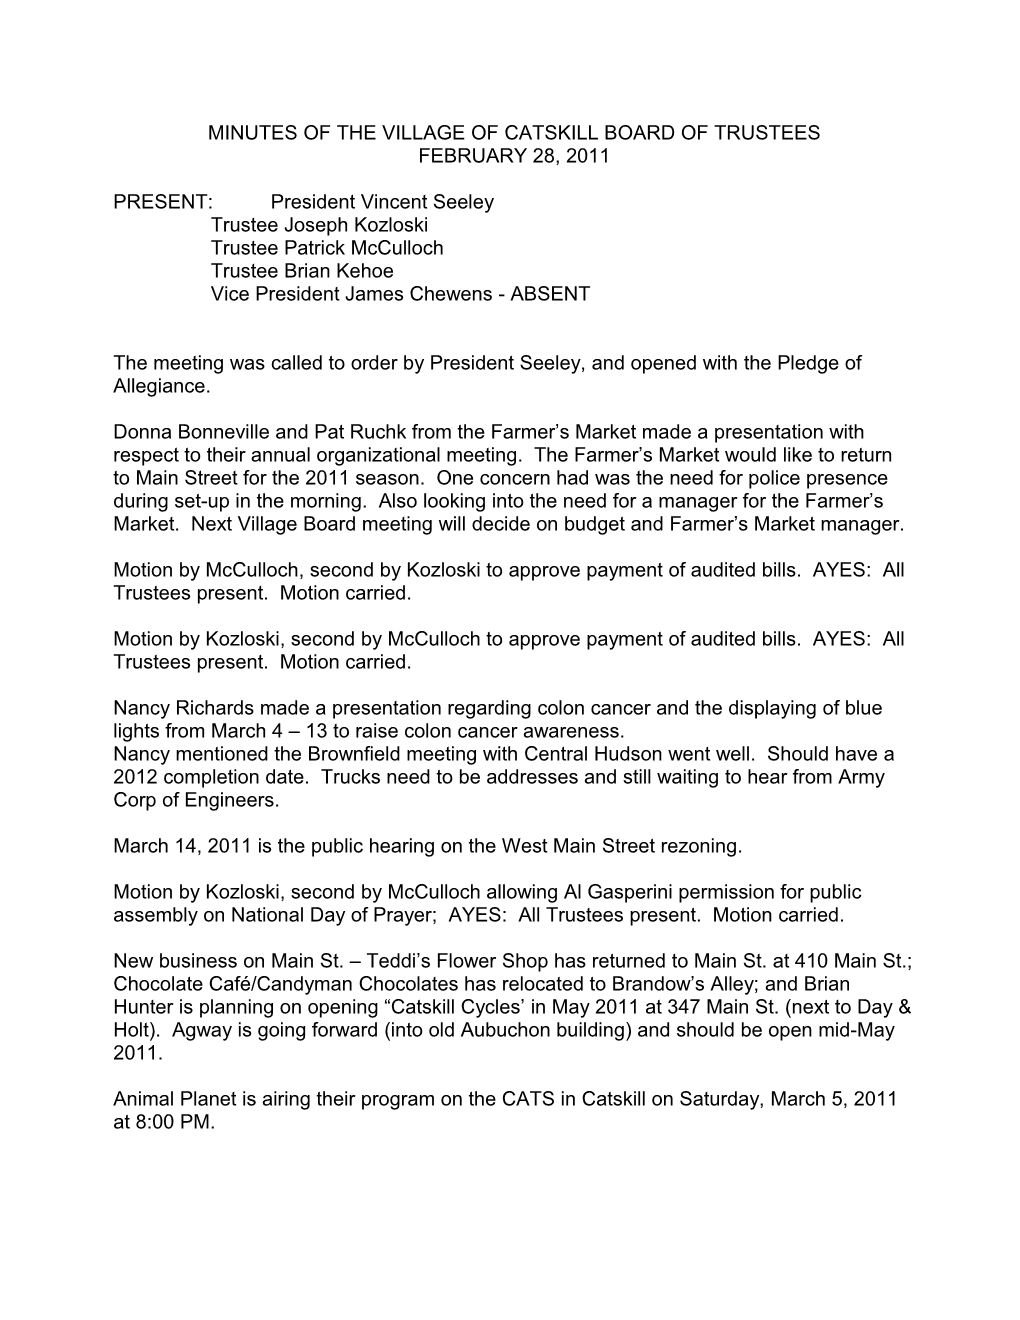 Minutes of the Village of Catskill Board of Trustees s1